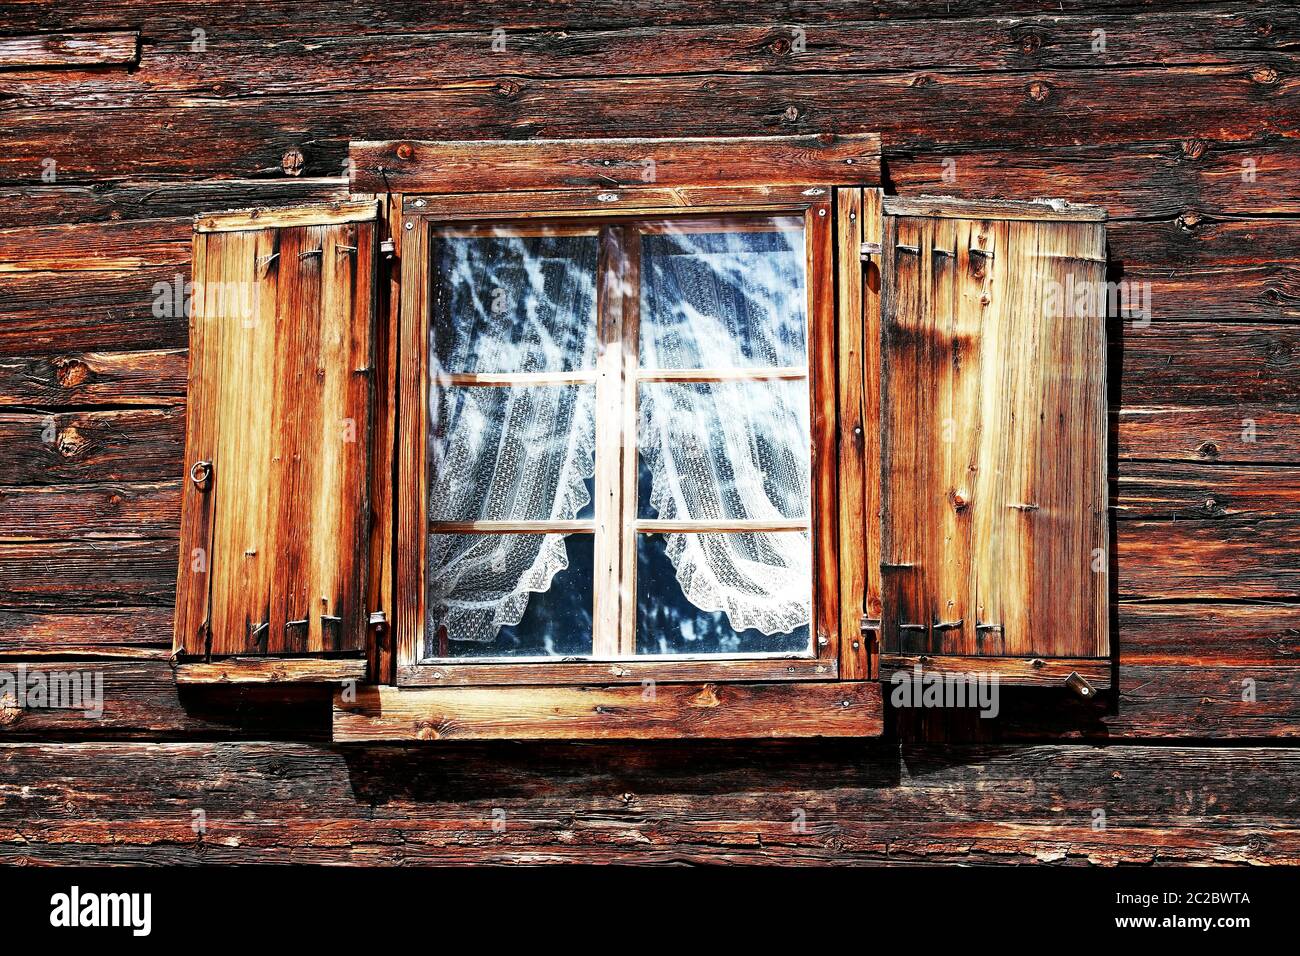 Windows with curtains and shutters on an old wooden house Stock Photo